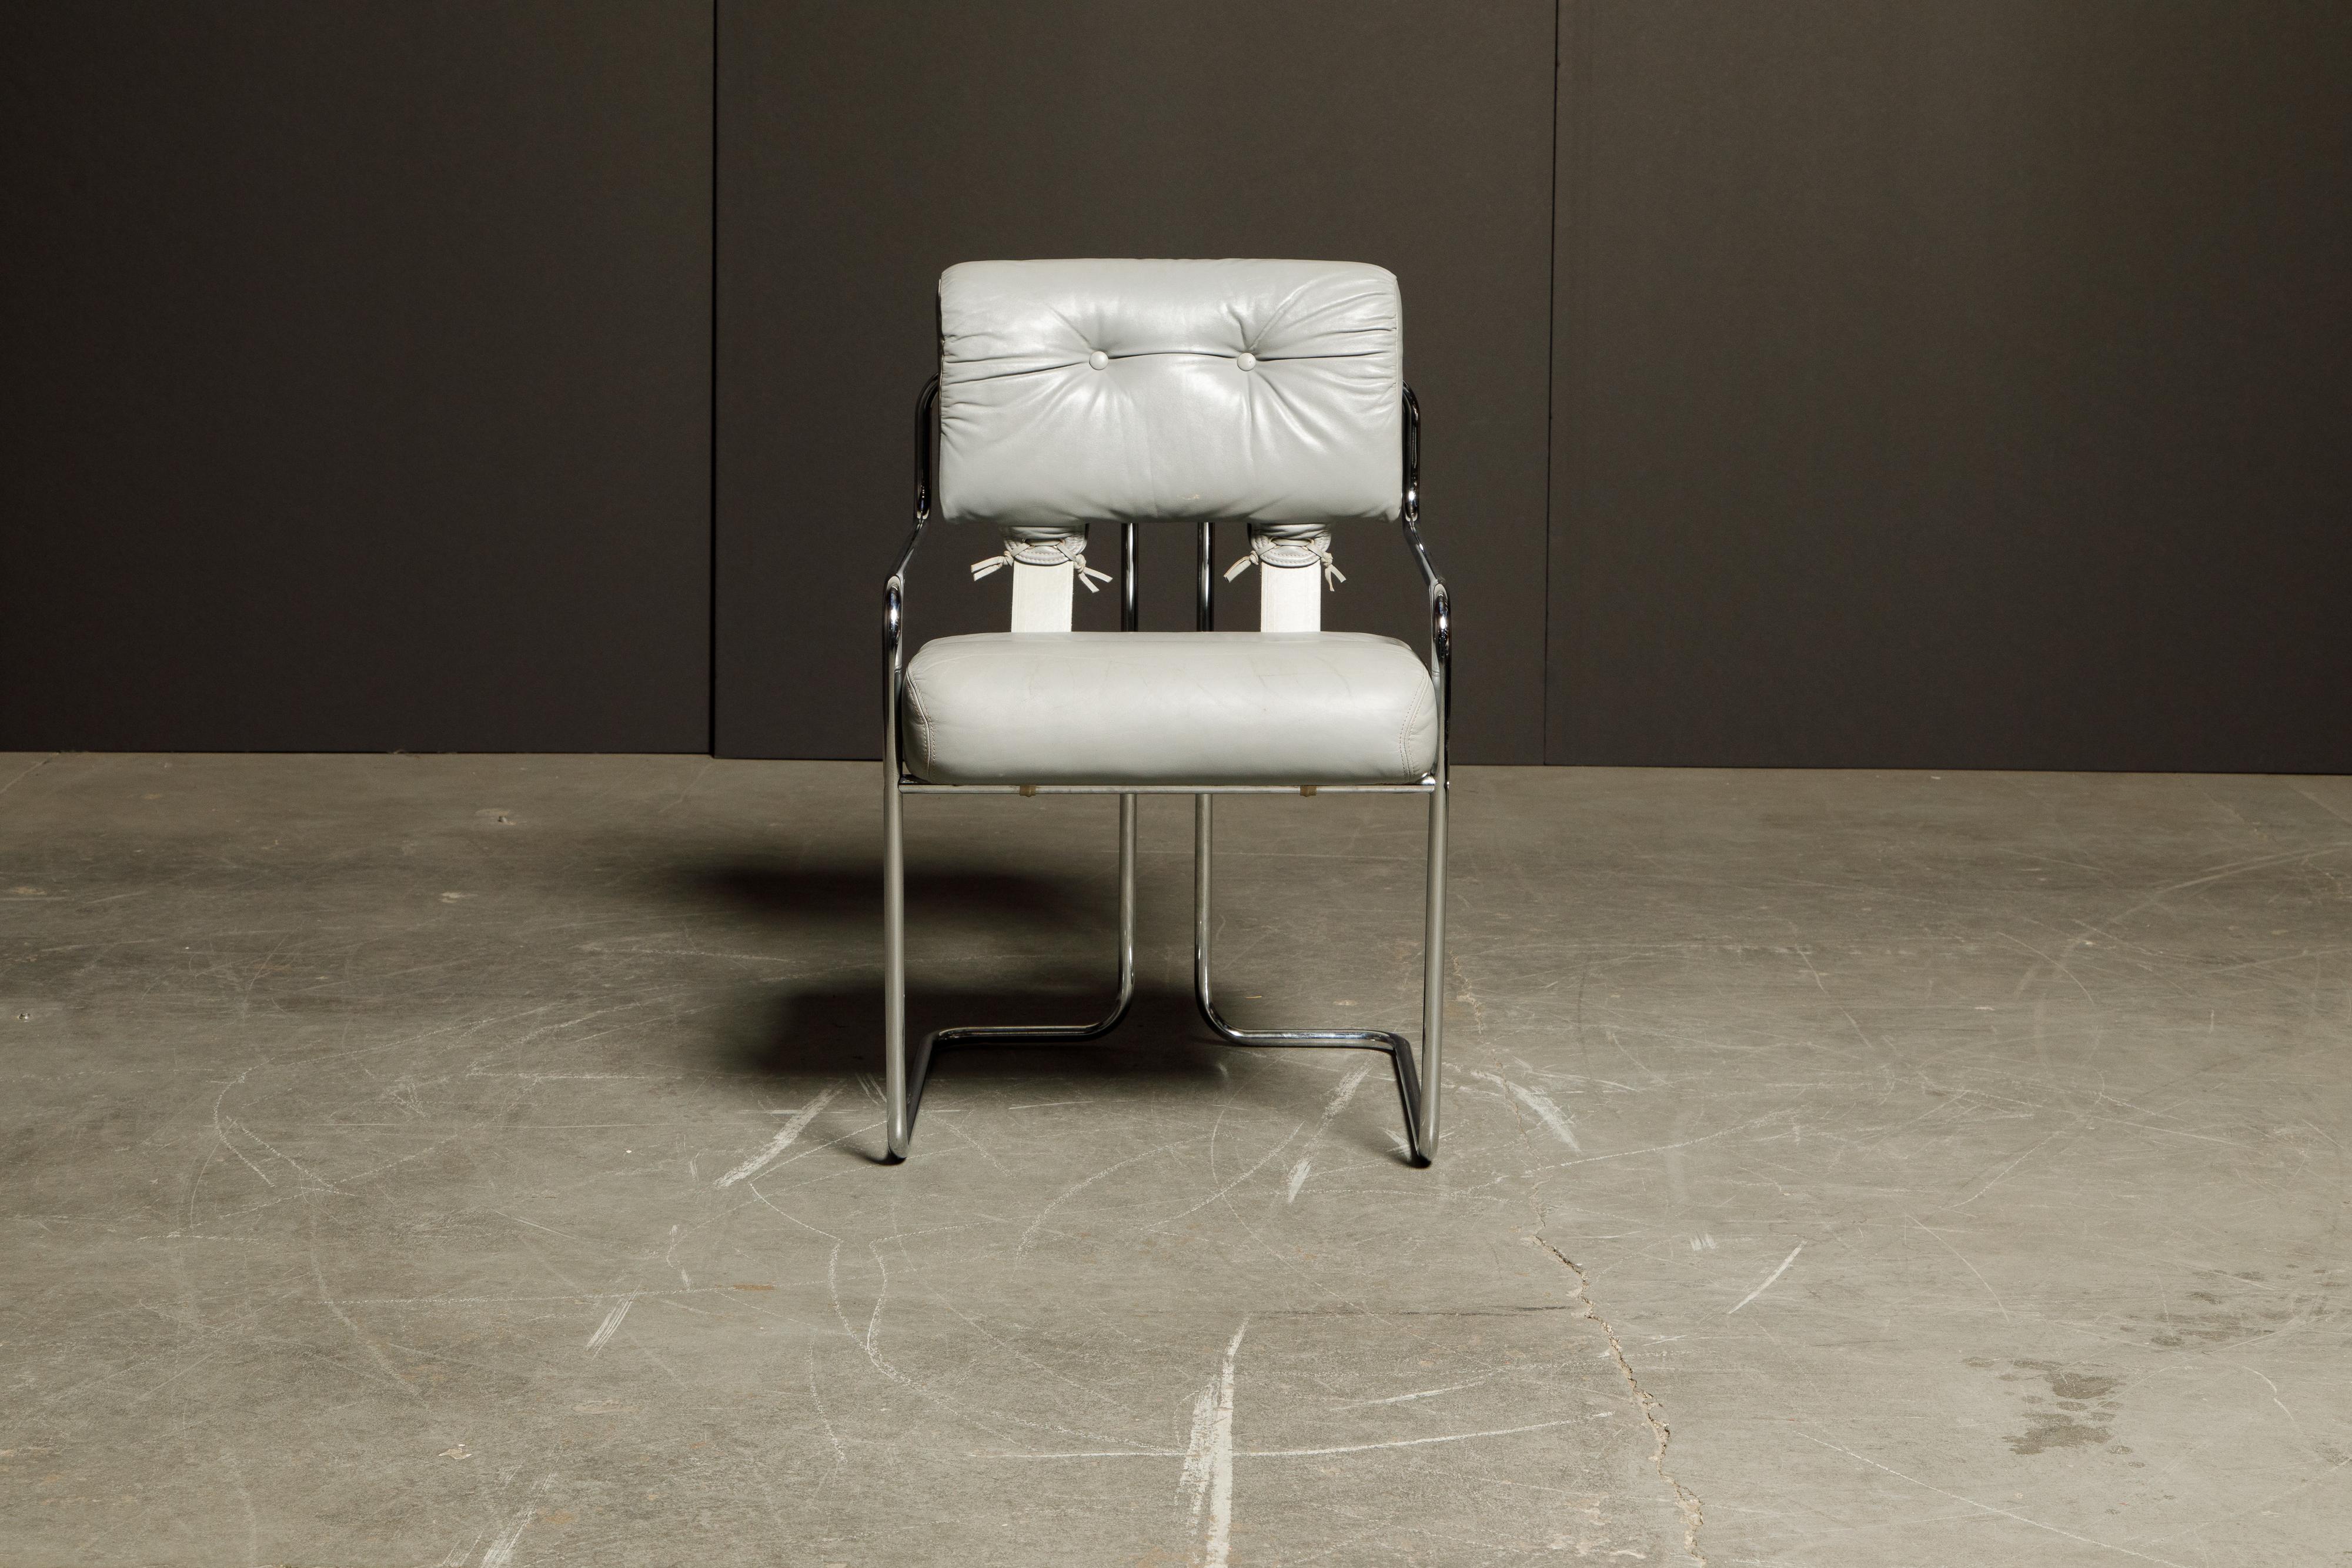 A beautiful Tucroma armchair by Guido Faleschini for i4 Mariani in beautiful light grey leather with polished chrome frame. The seat and back retains its original supple light gray leather upholstery and attached to graceful steel tubular frames, as